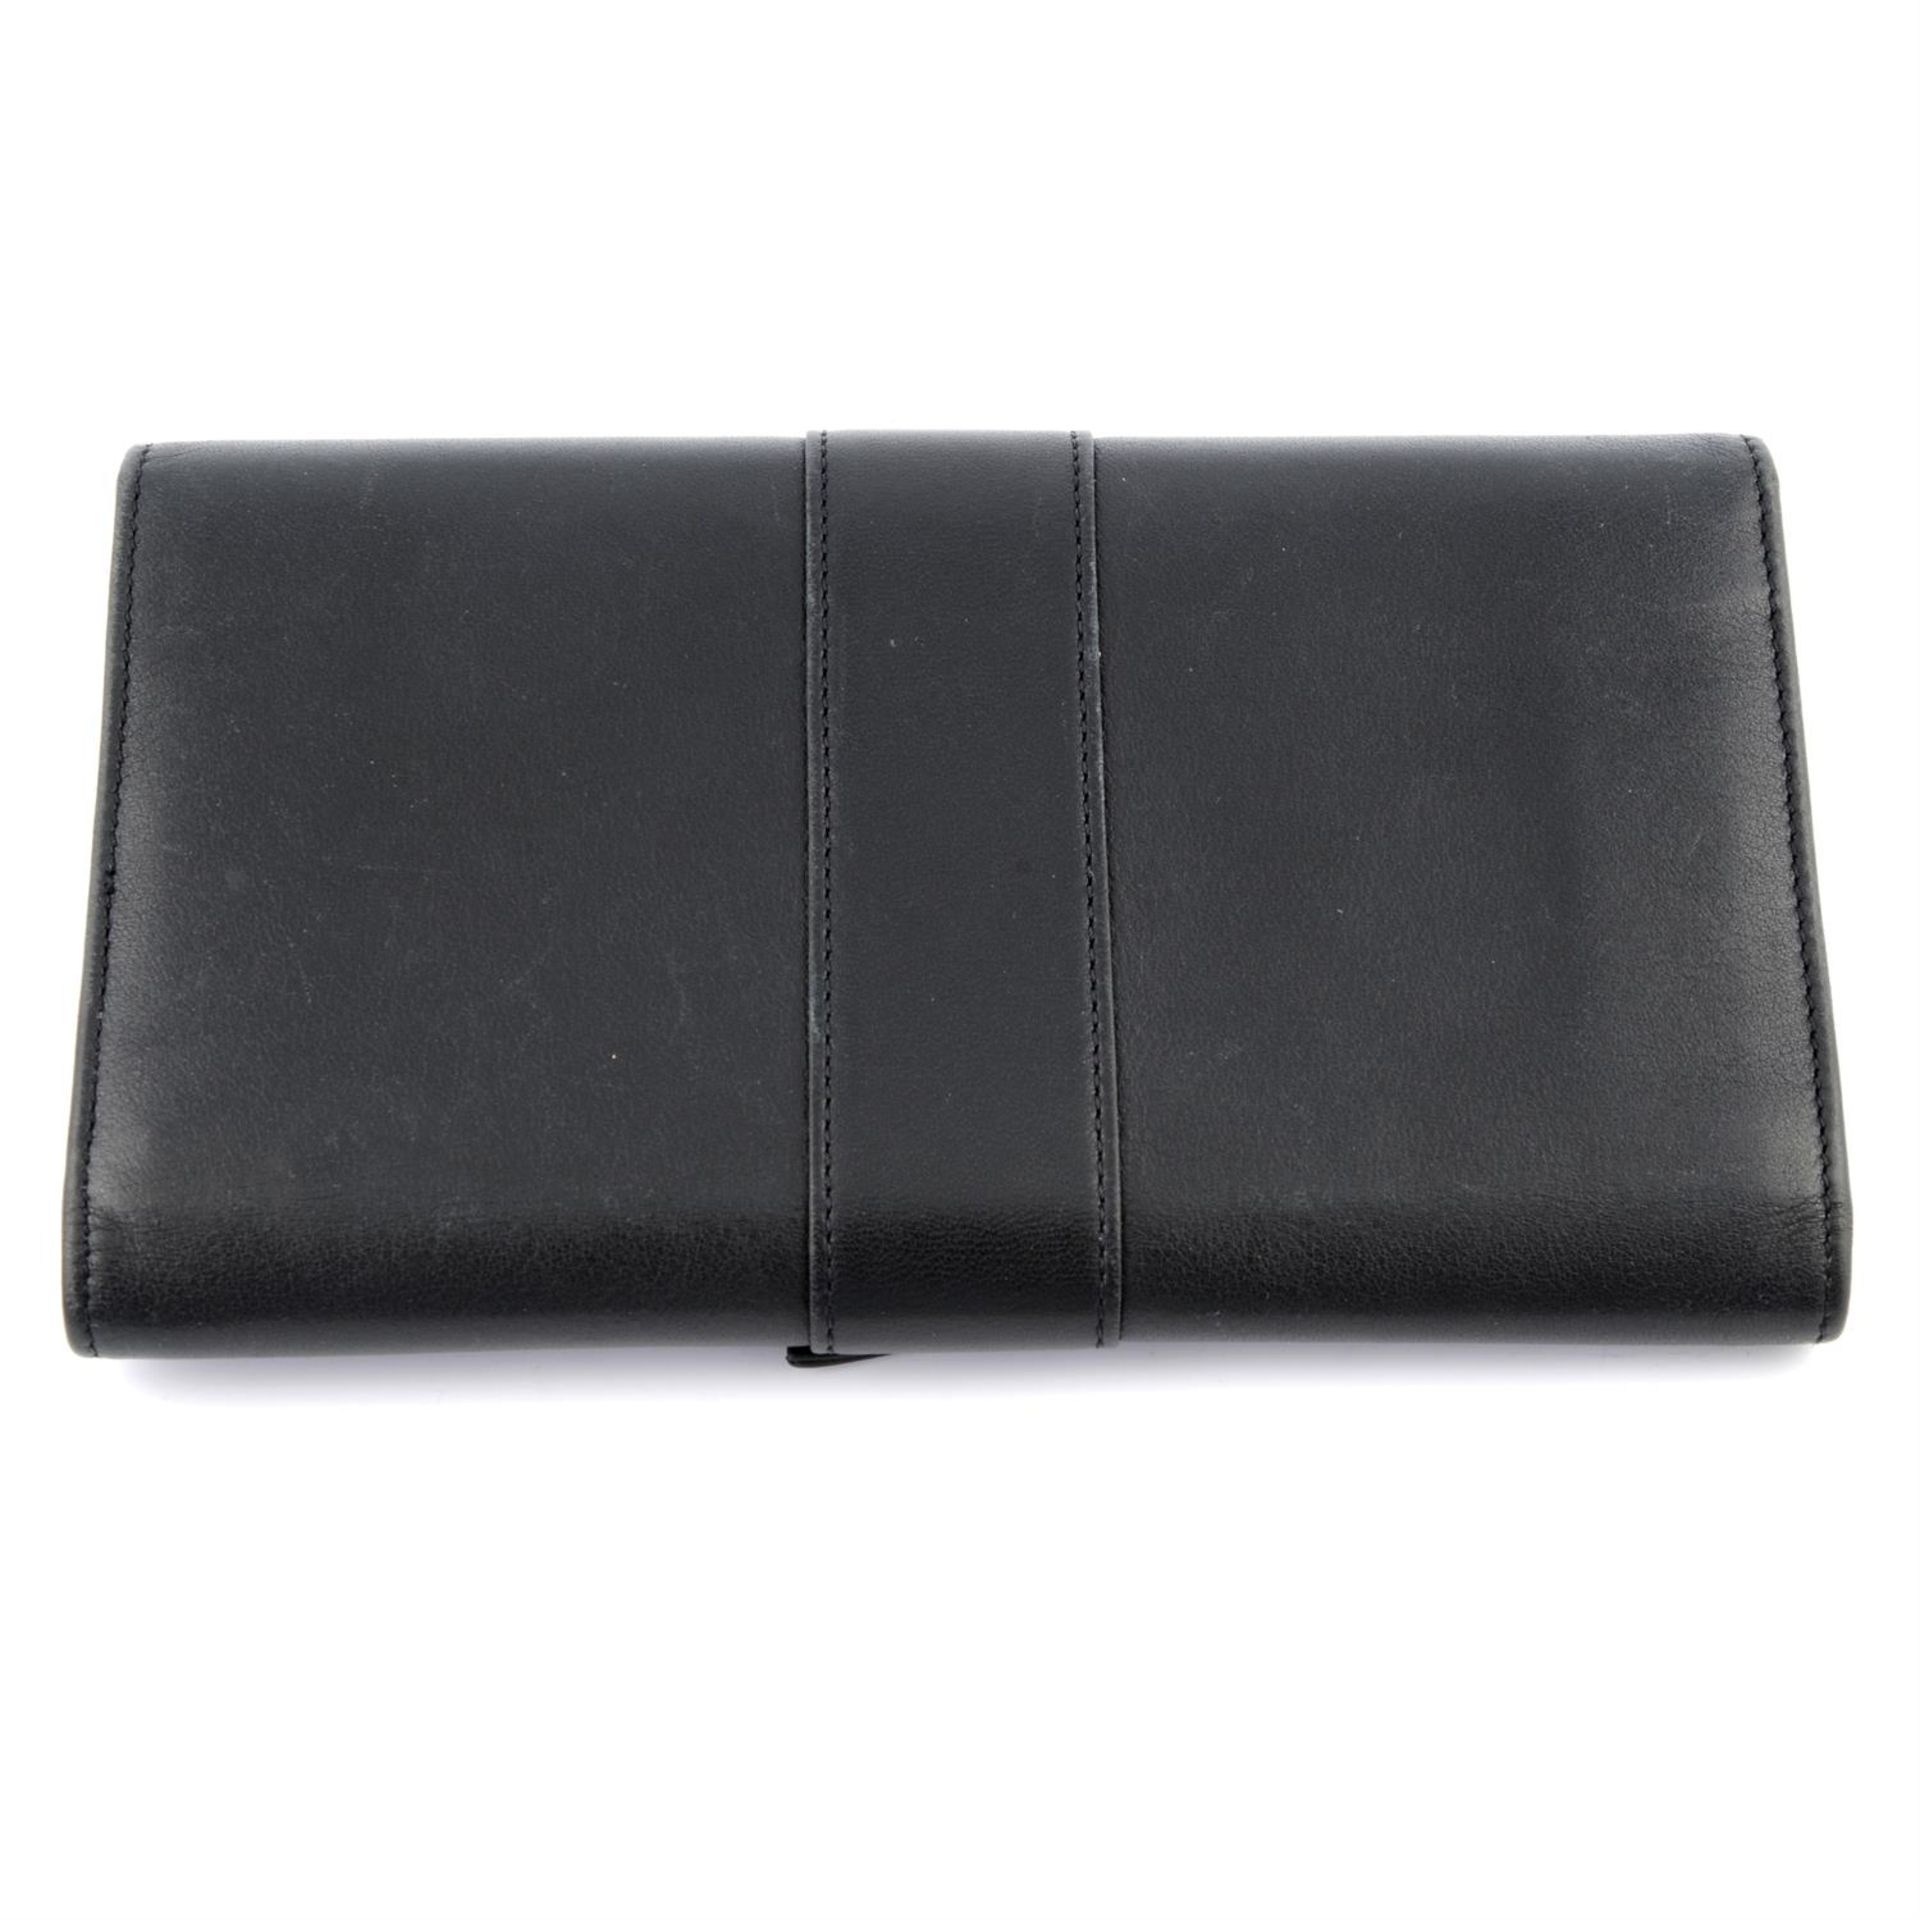 CARTIER - a black leather tri fold Trinity wallet. - Image 2 of 4